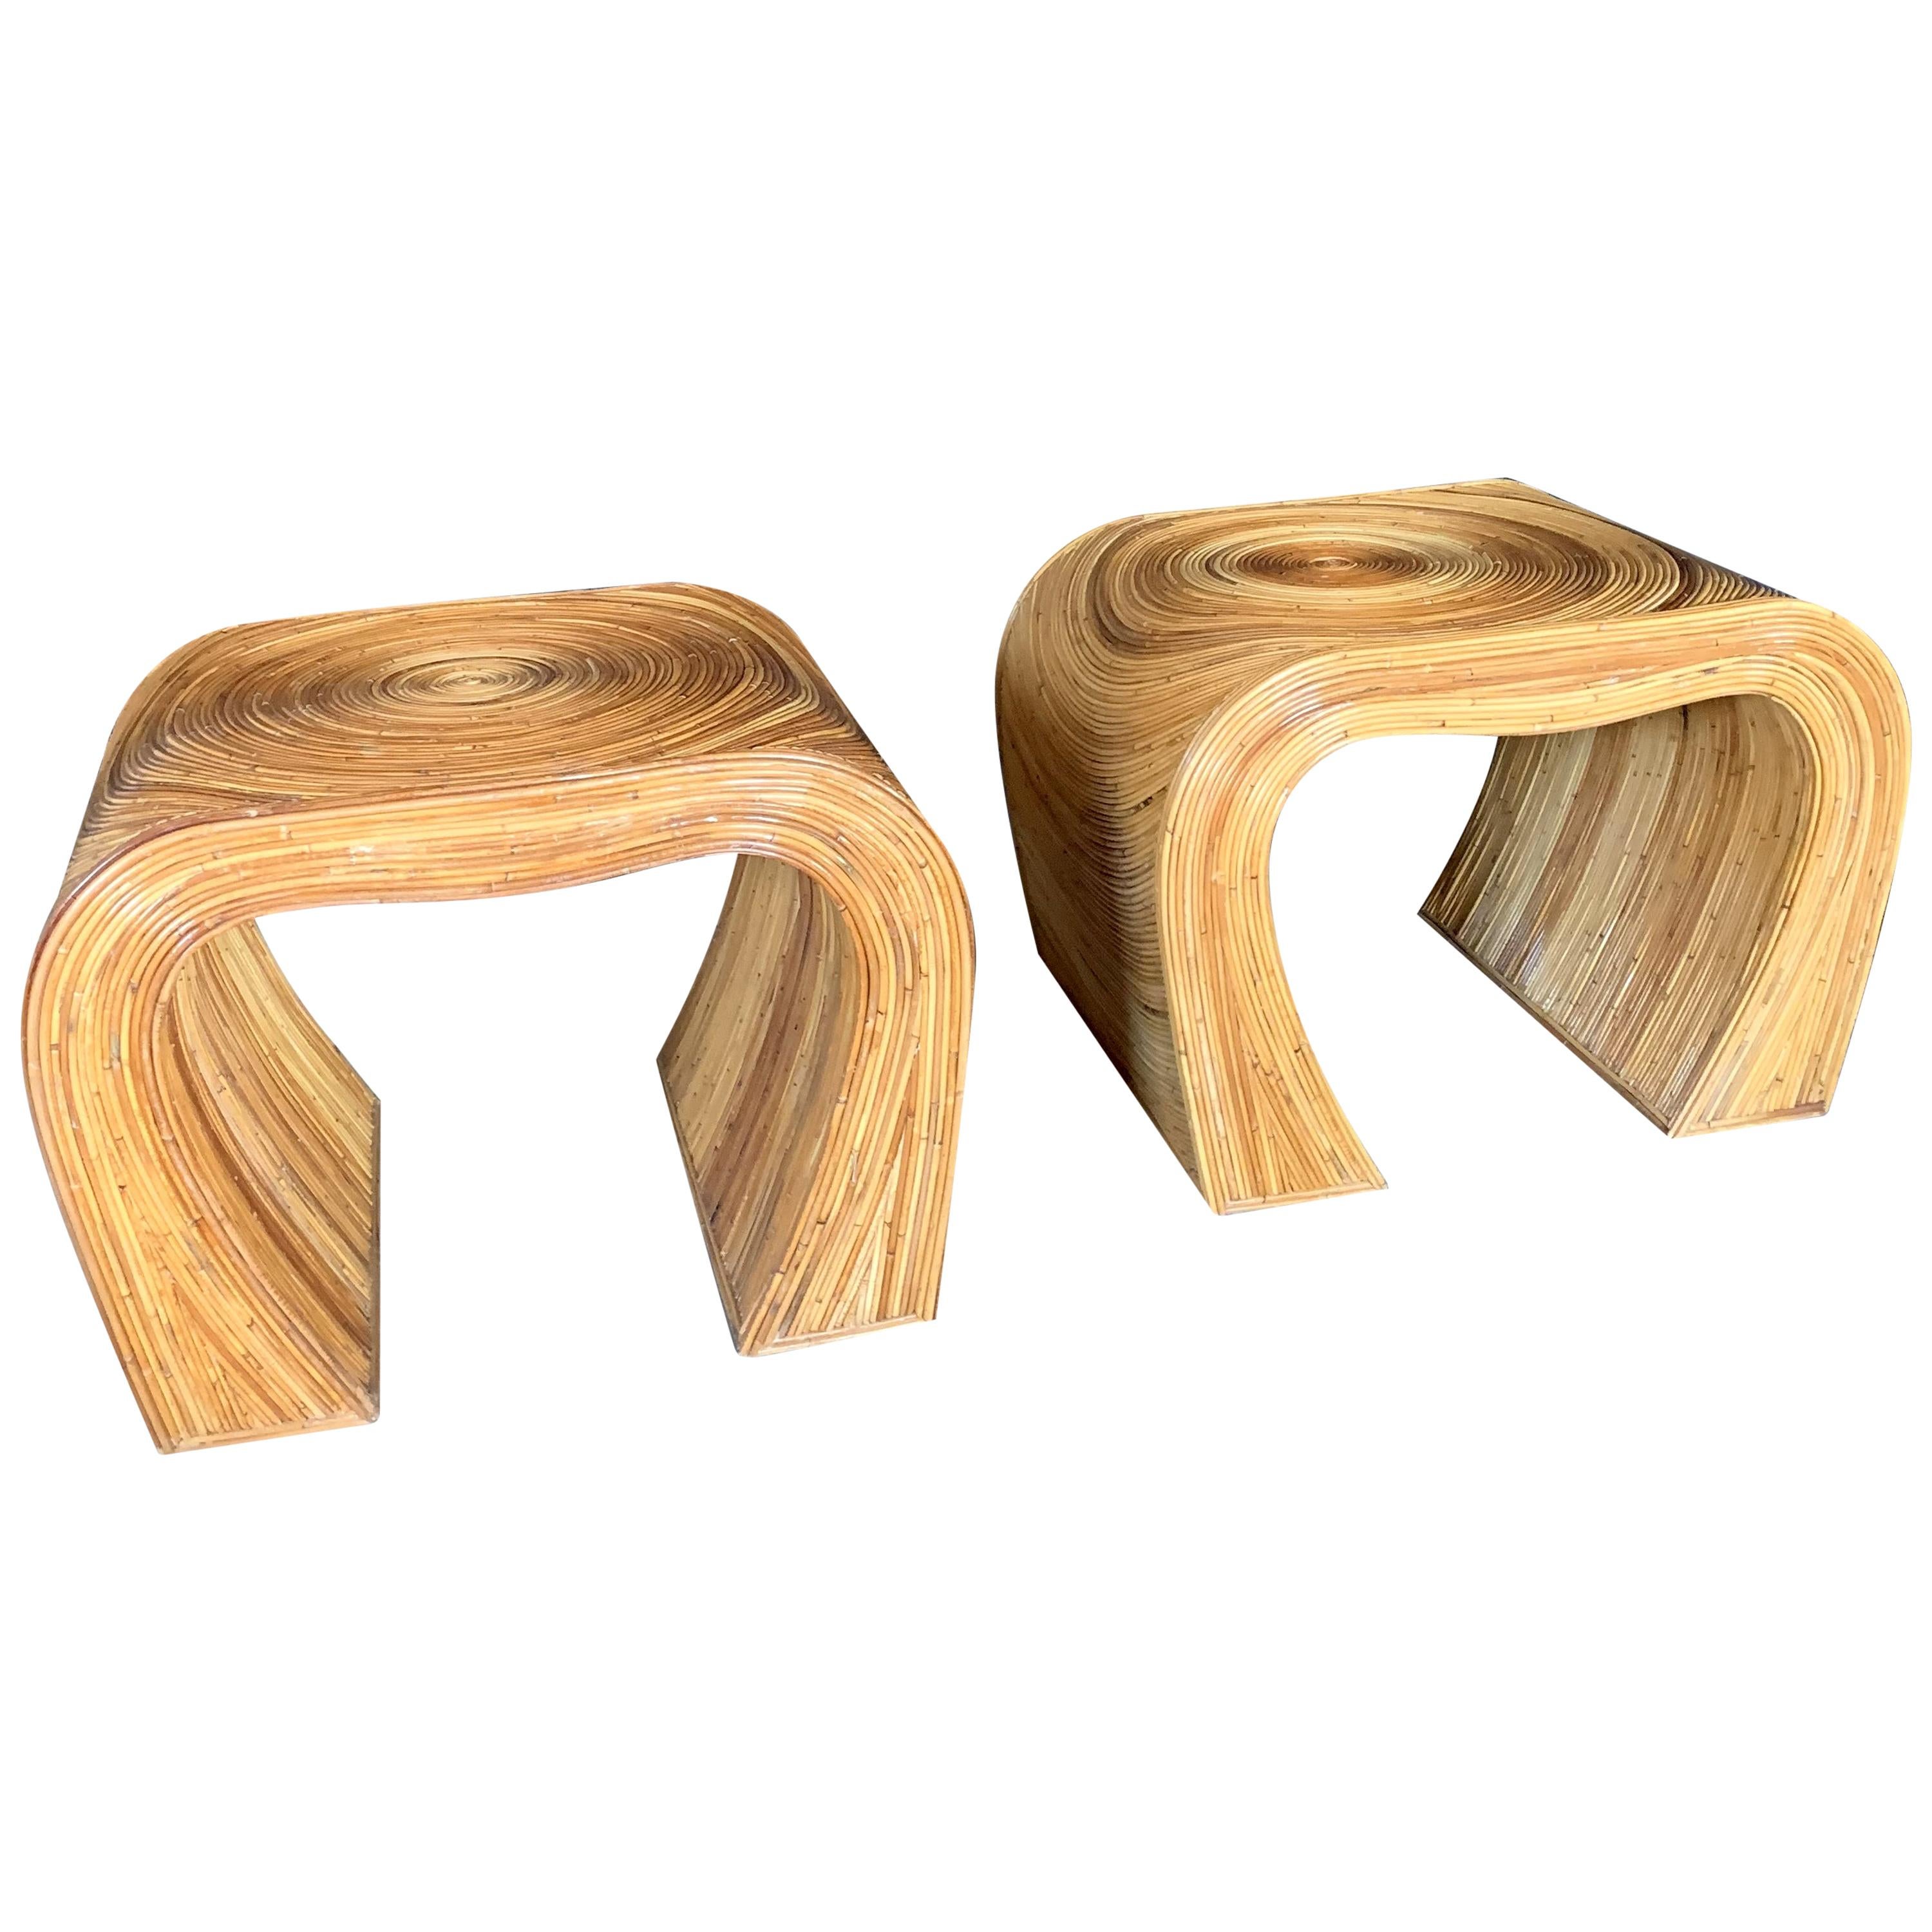 Pencil Reed Bamboo End Tables or Nightstands, Gabriella Crespie Style